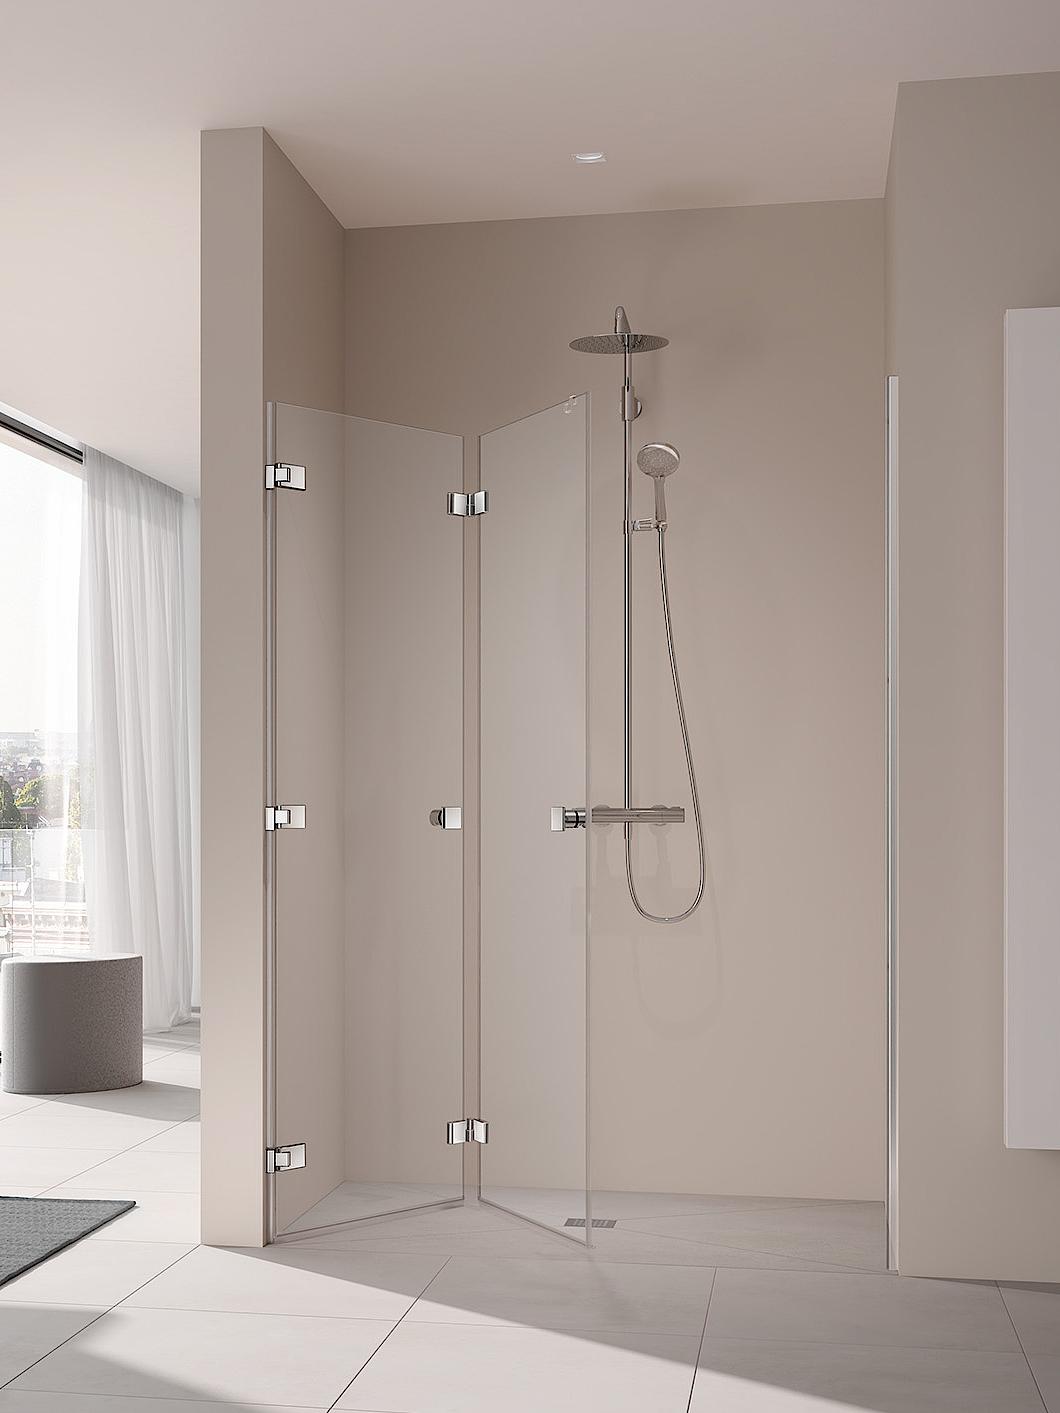 Kermi shower enclosure MENA single-panel folding door with 3rd wall hinge and additional handle open